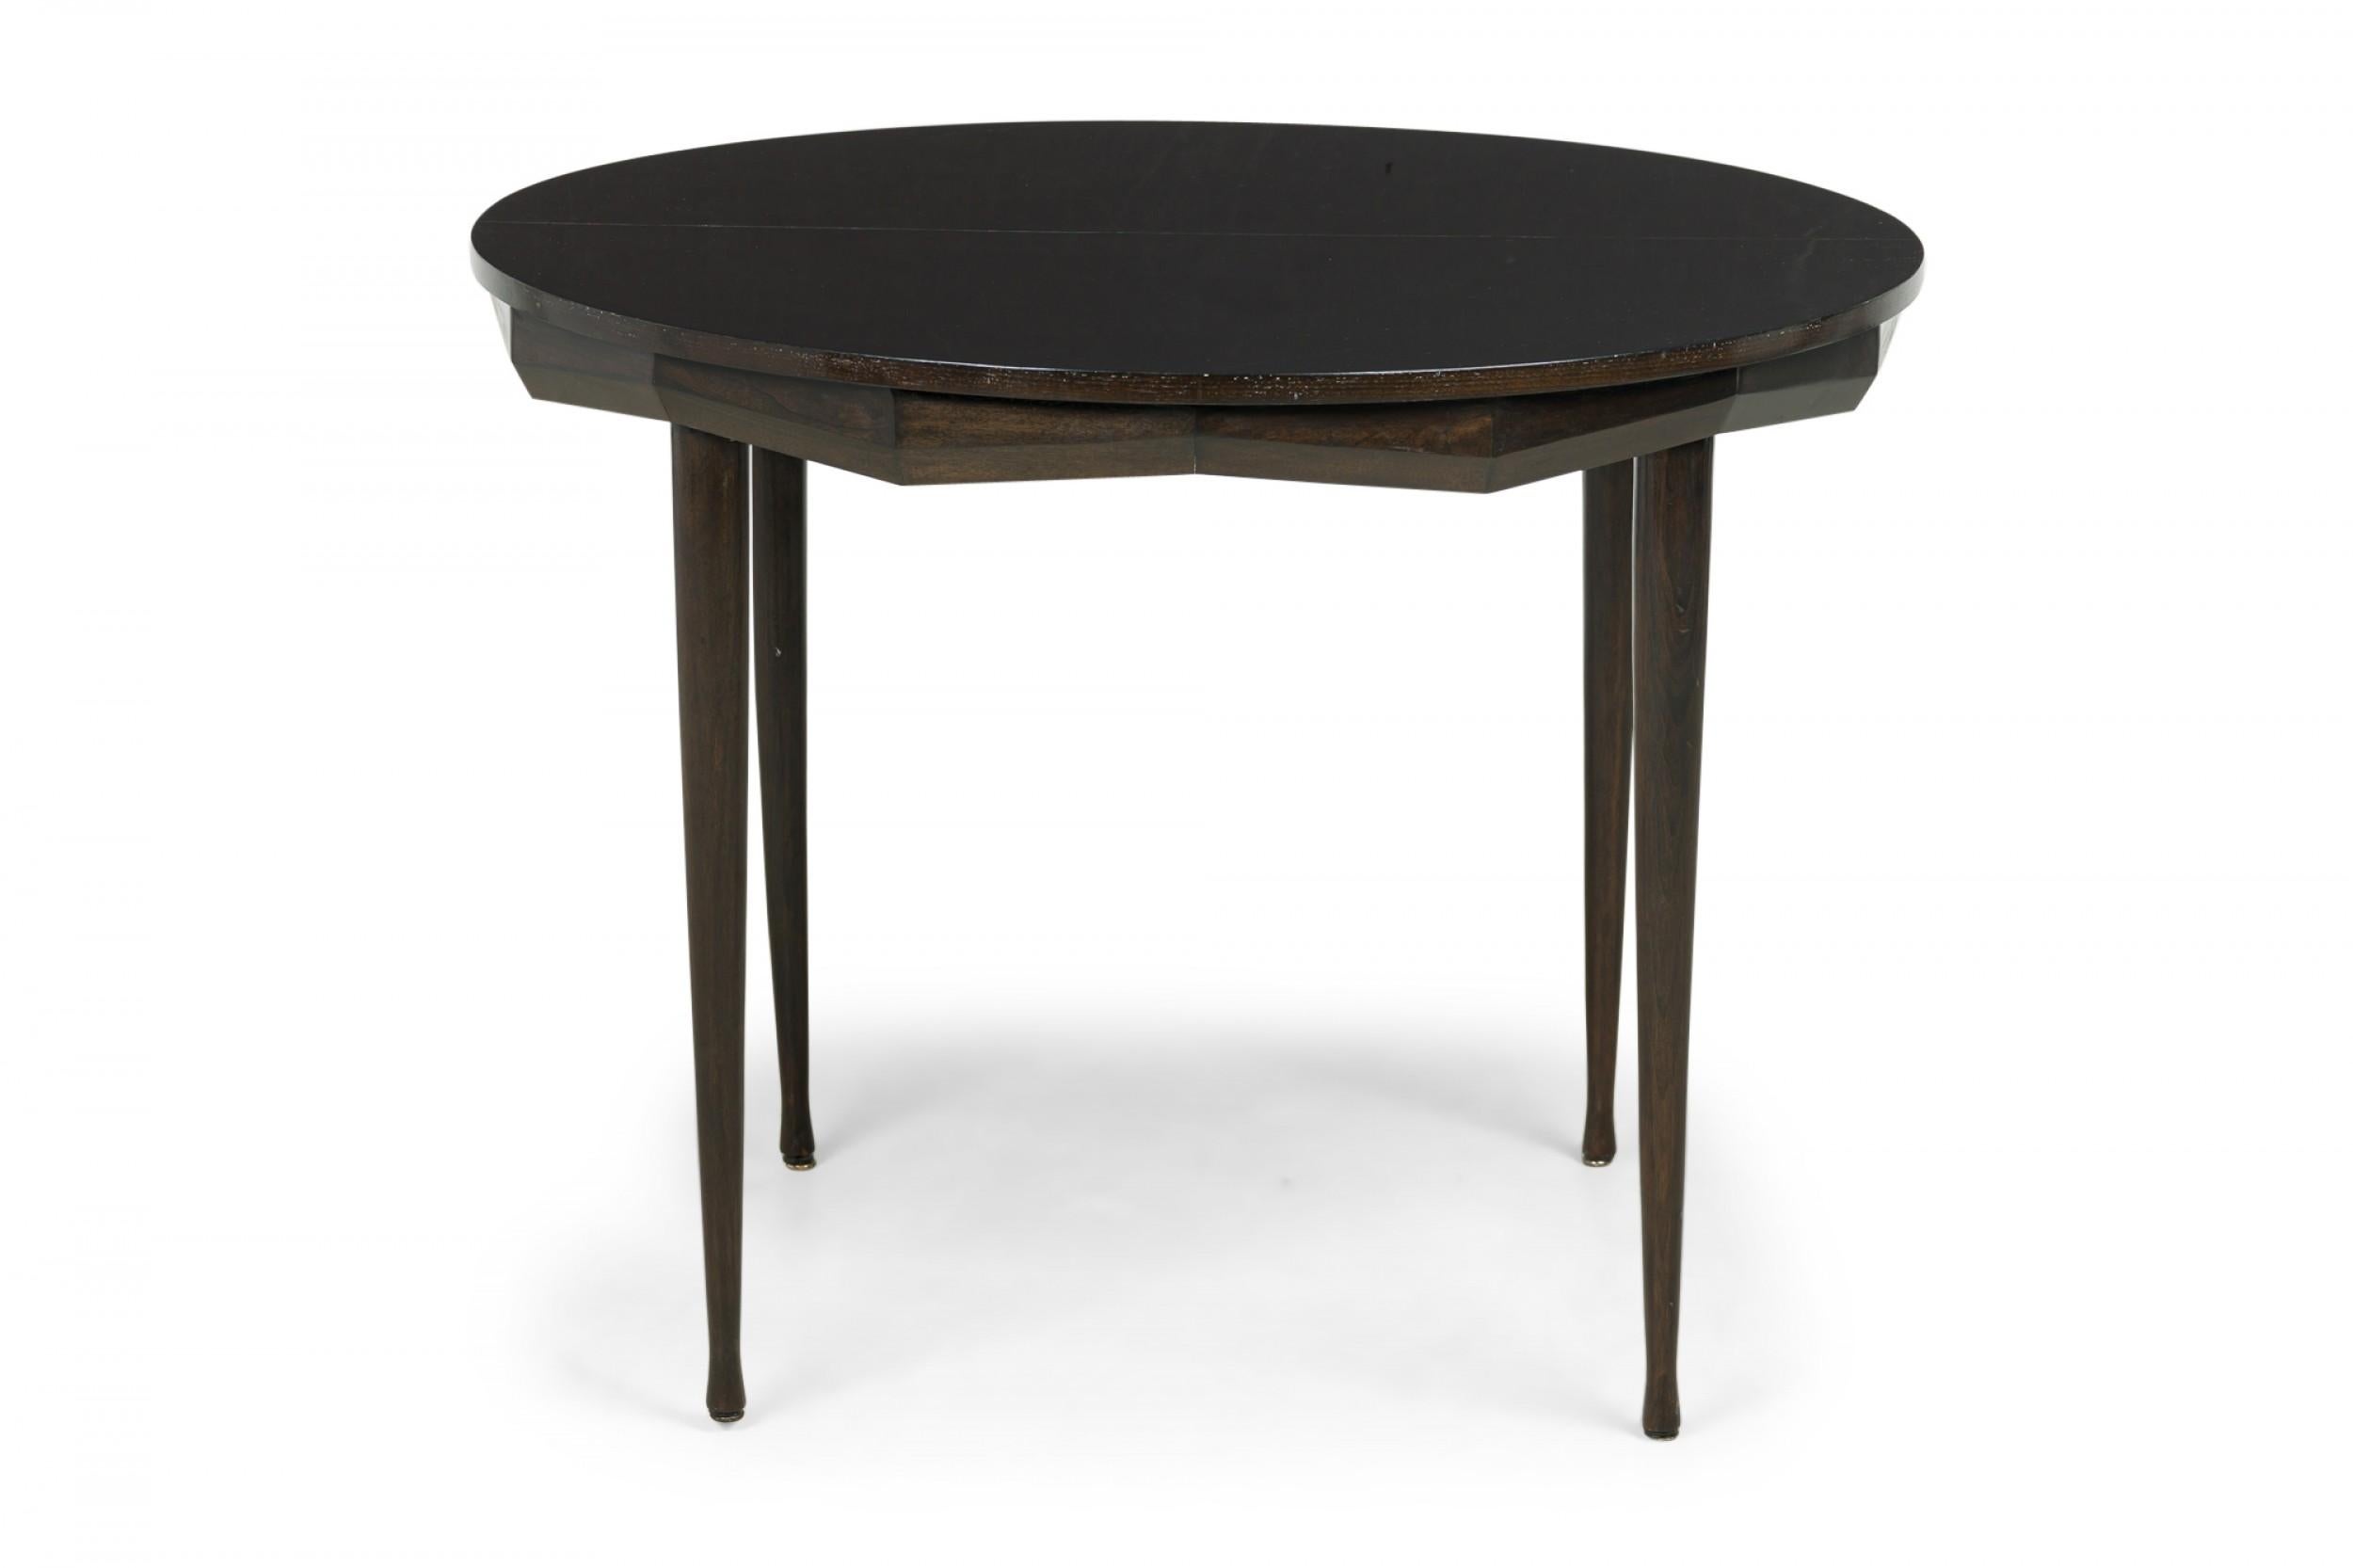 Italian Mid-Century circular wooden center / dining / breakfast table in a dark finish, with a faceted apron and four tapered cylindrical legs. (ICO PARISI)
